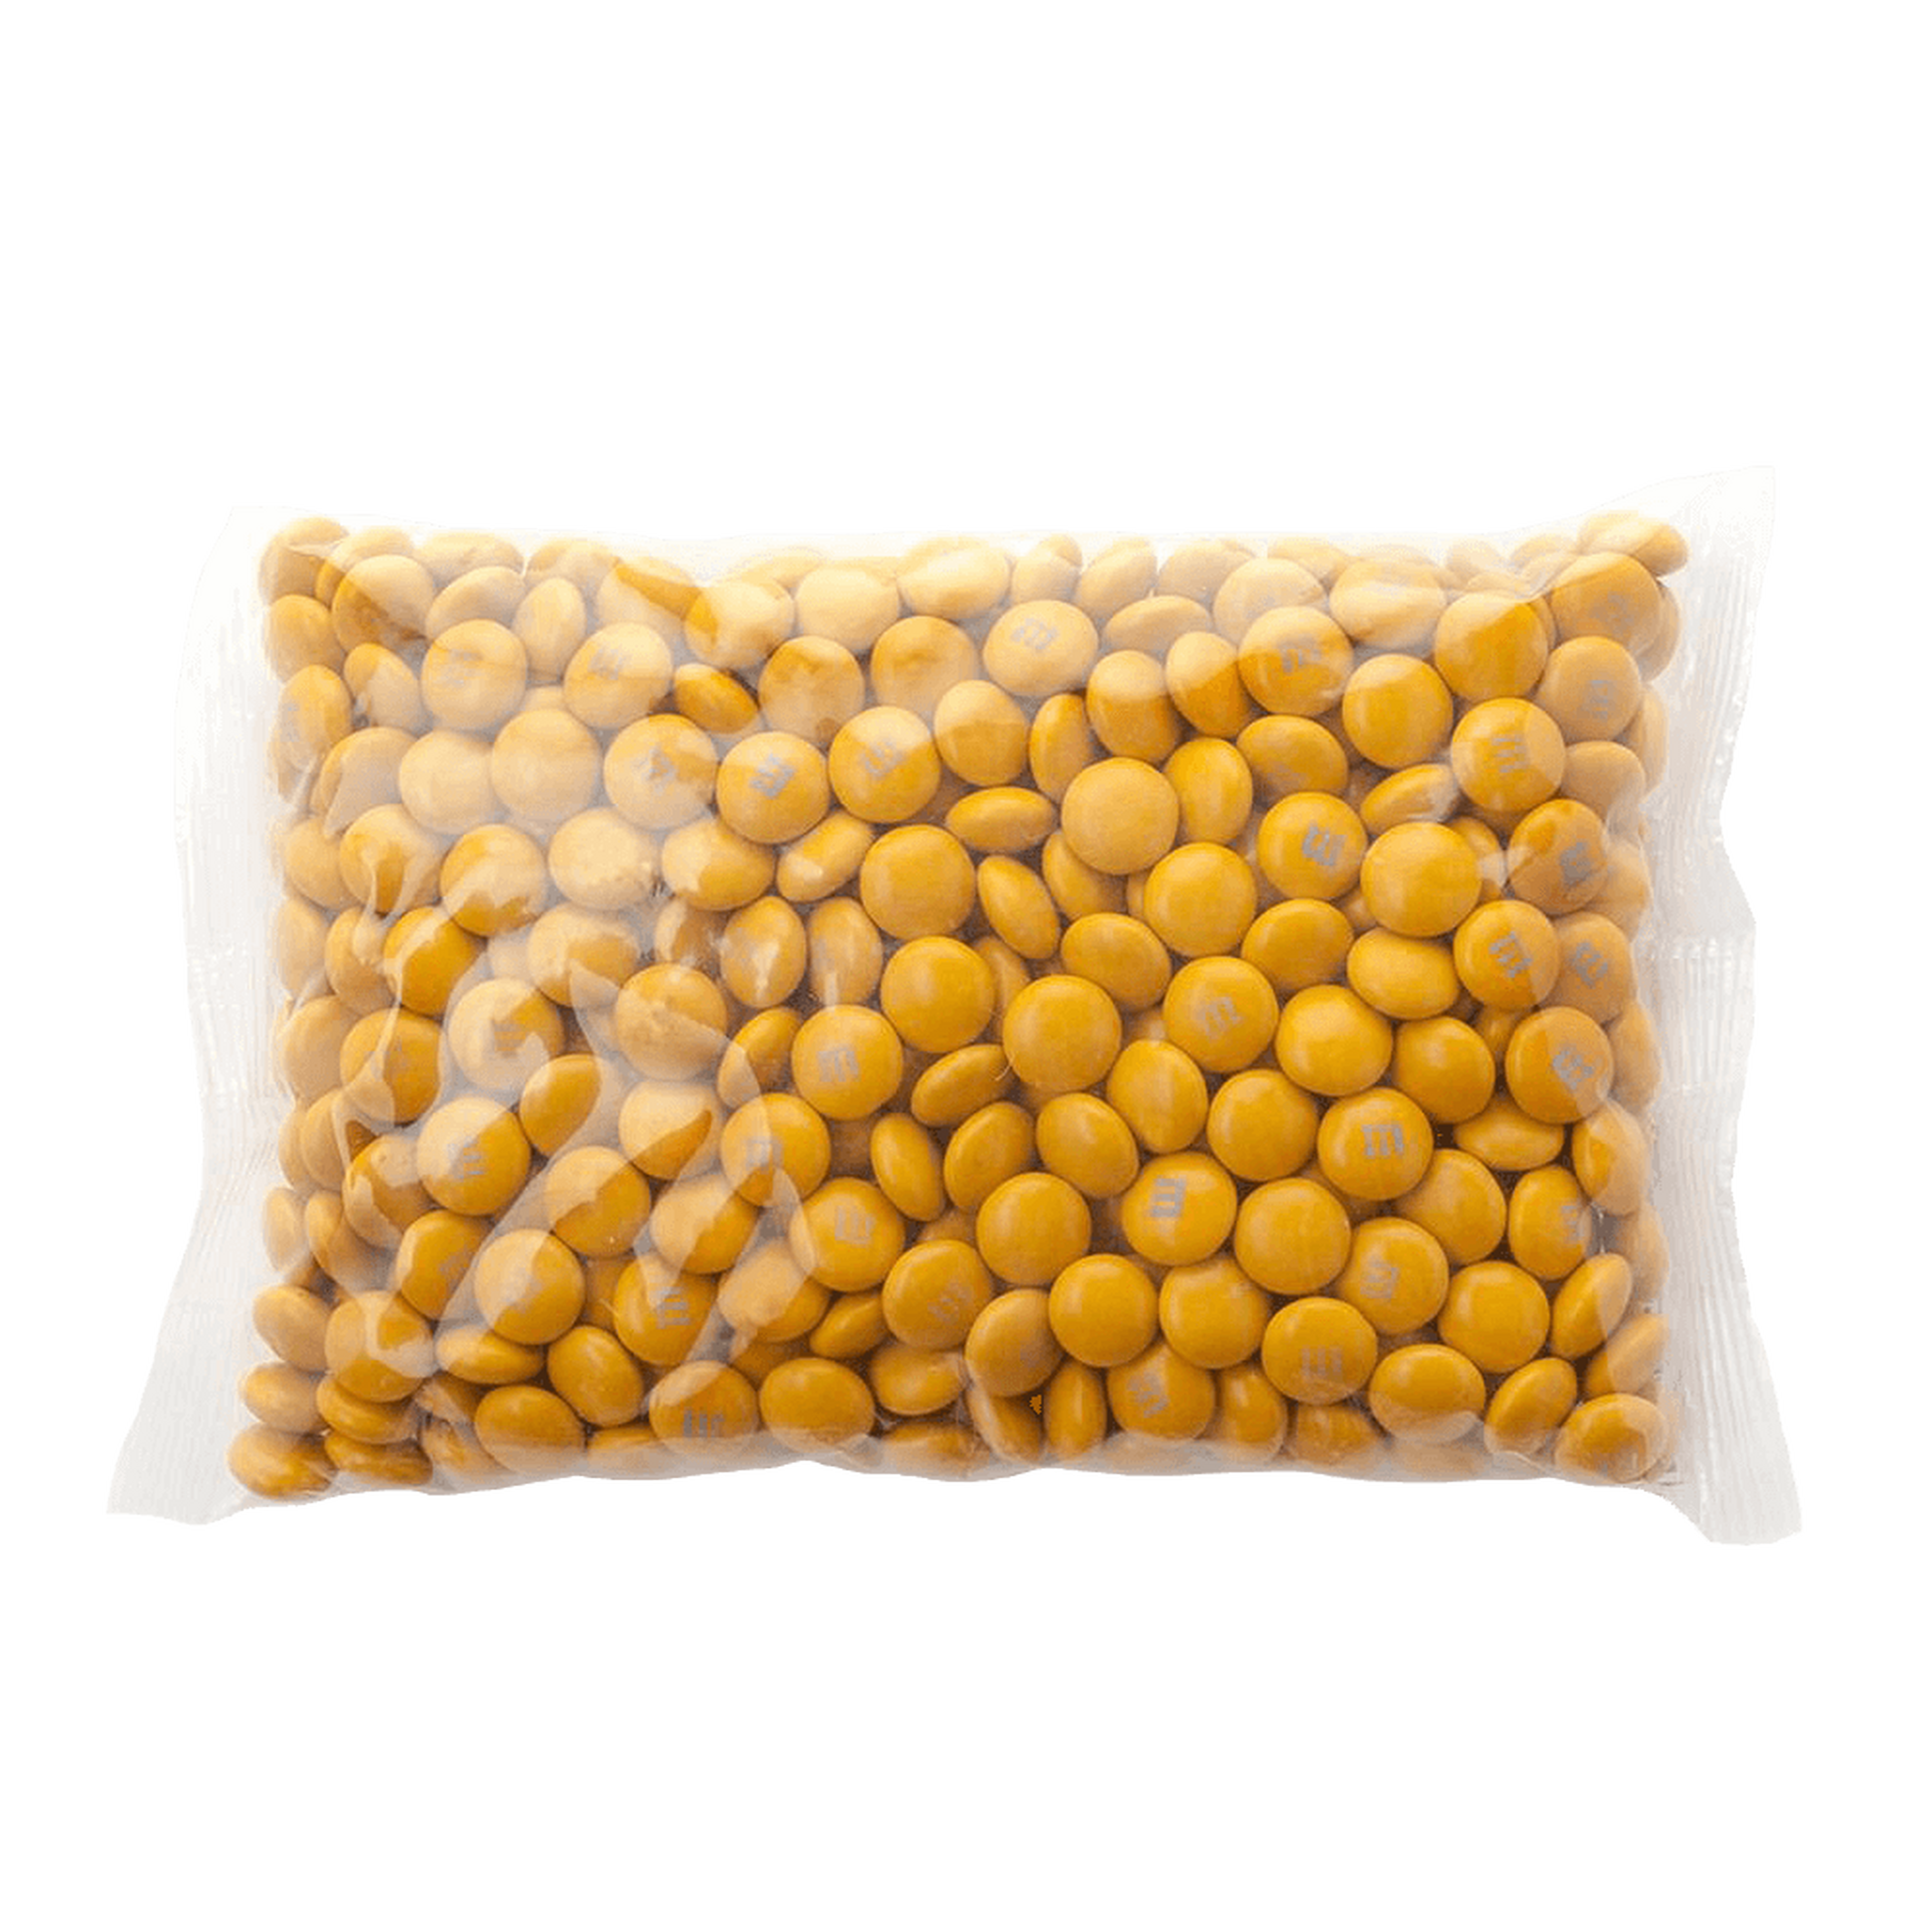  M&M'S Pre-Printed Halloween Candy - 2lbs of Bulk Candy